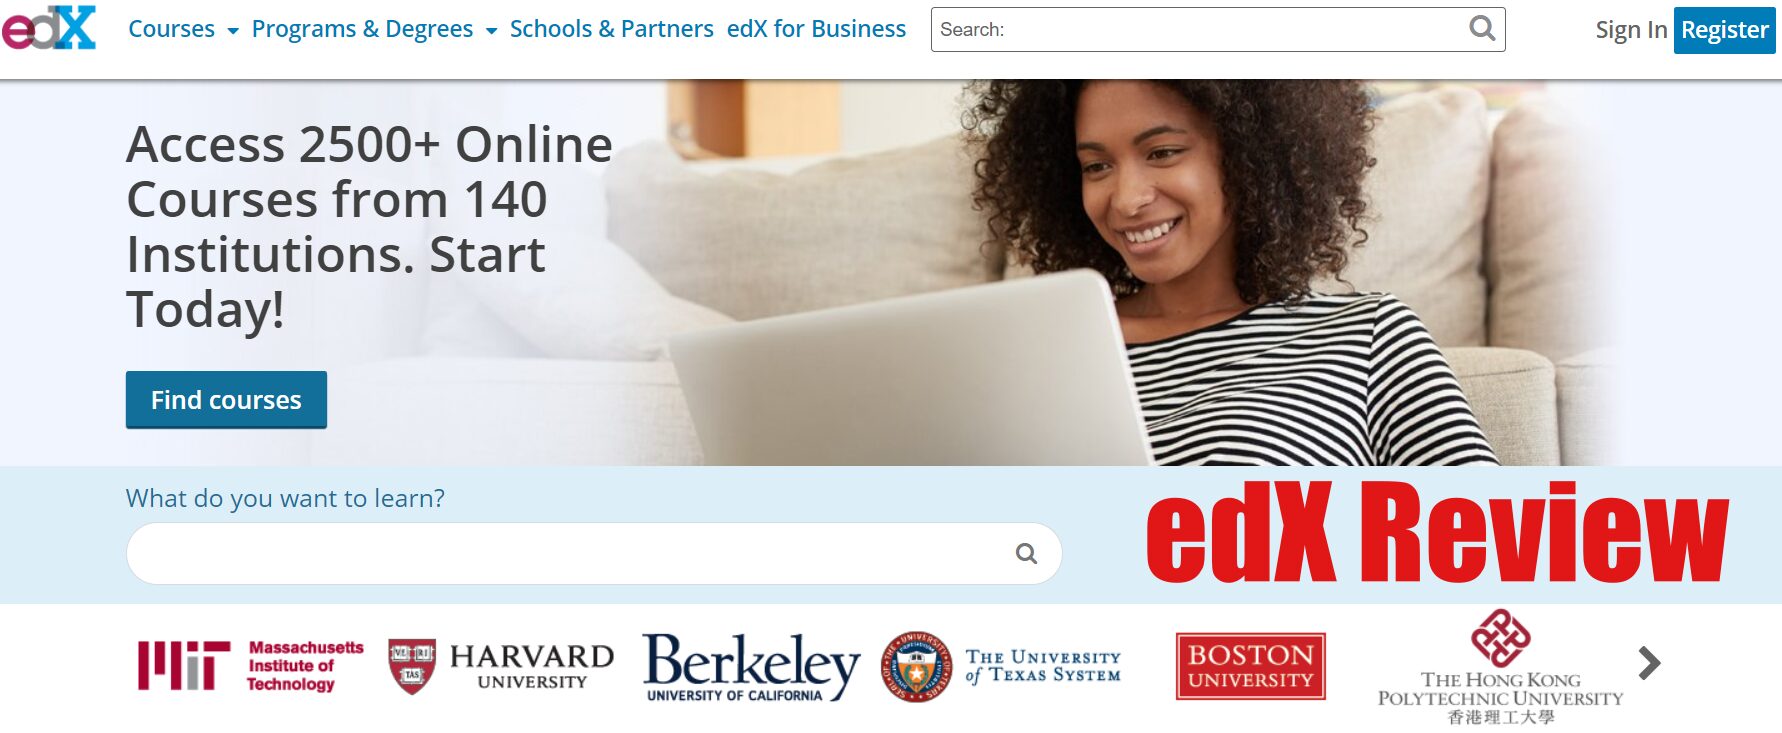 edx review - e-learning home study coming from MIT and Harvard